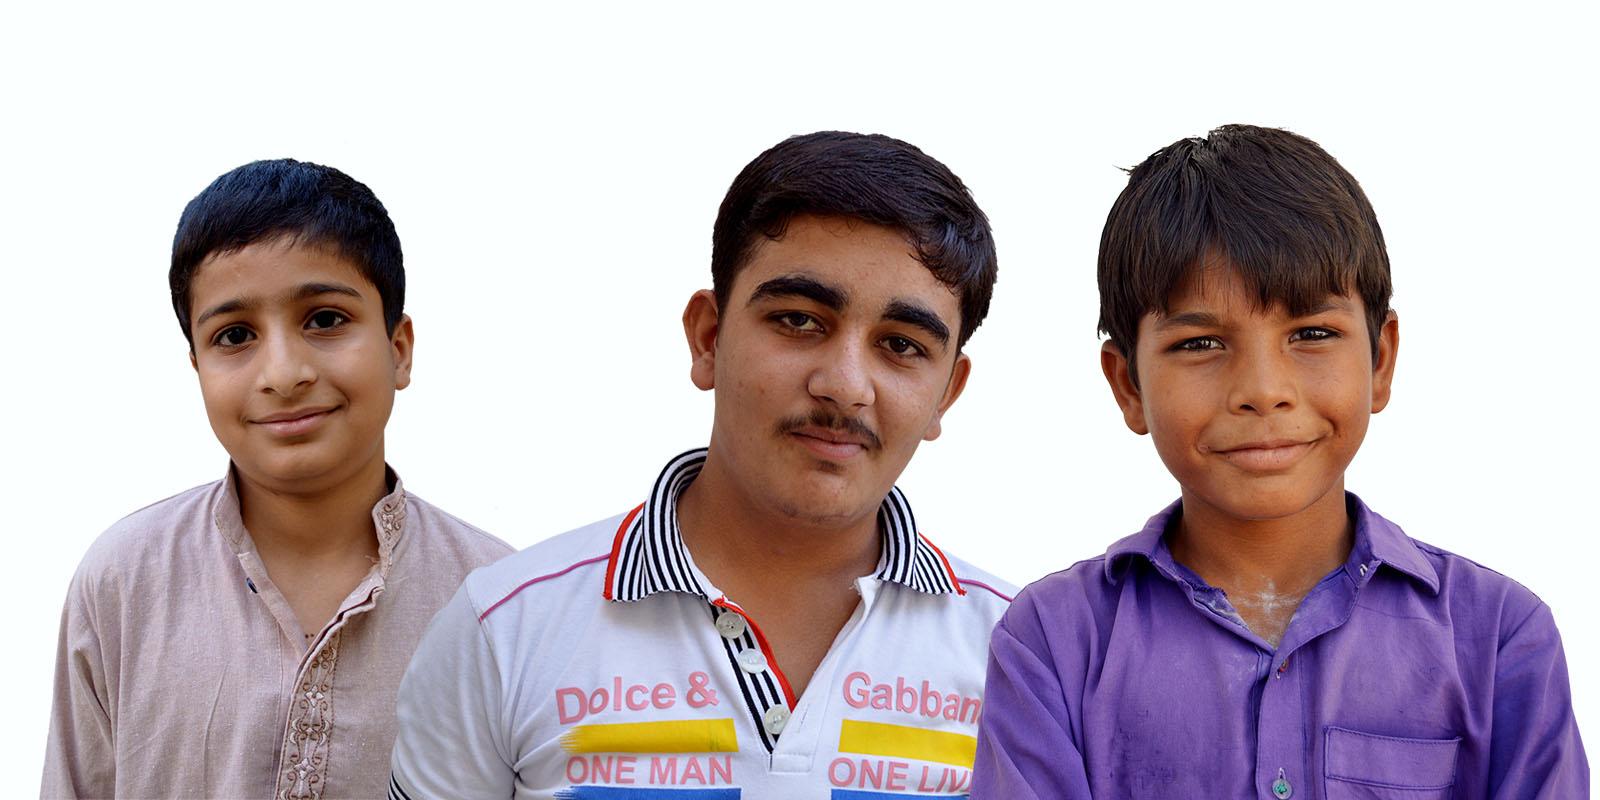 Portraits of three boys, Haseed, Ali and Baber.